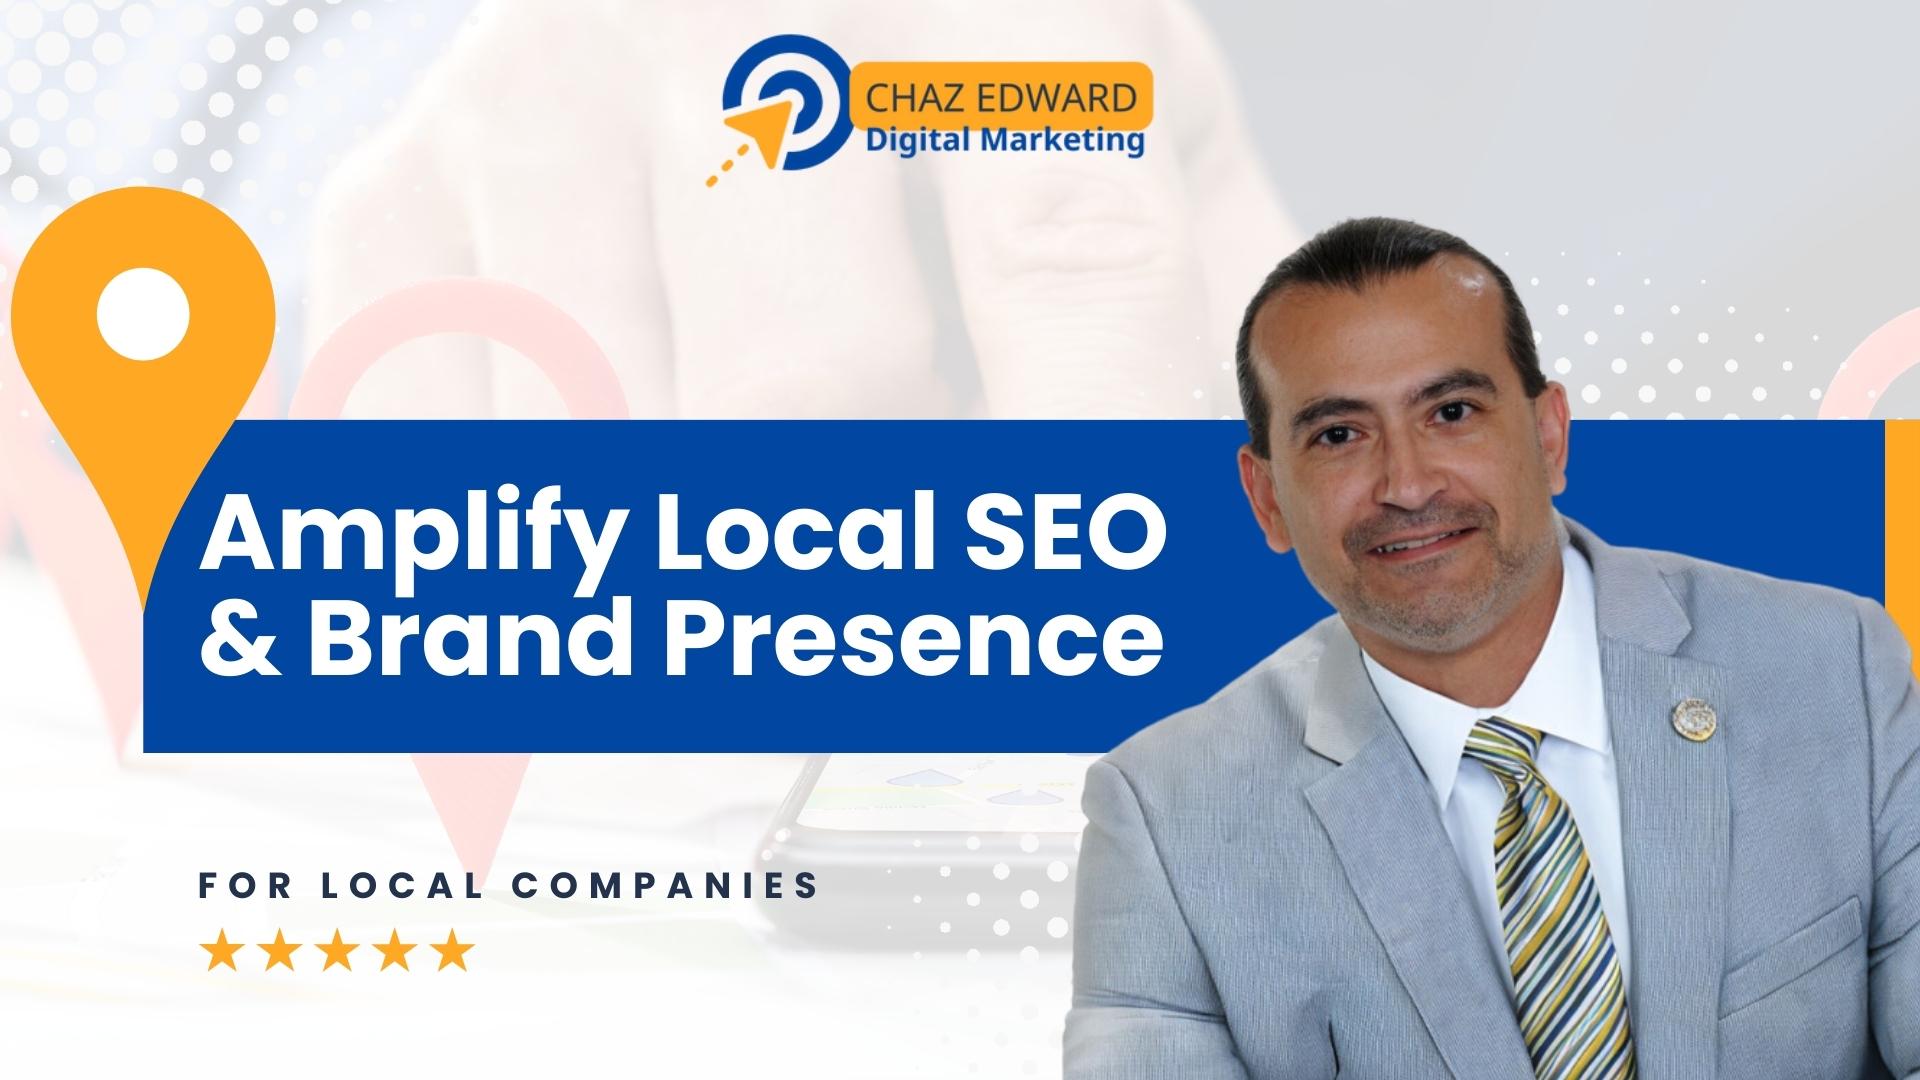 Chaz Edward Local Marketing Launches AI-Powered Amplify Local SEO Service